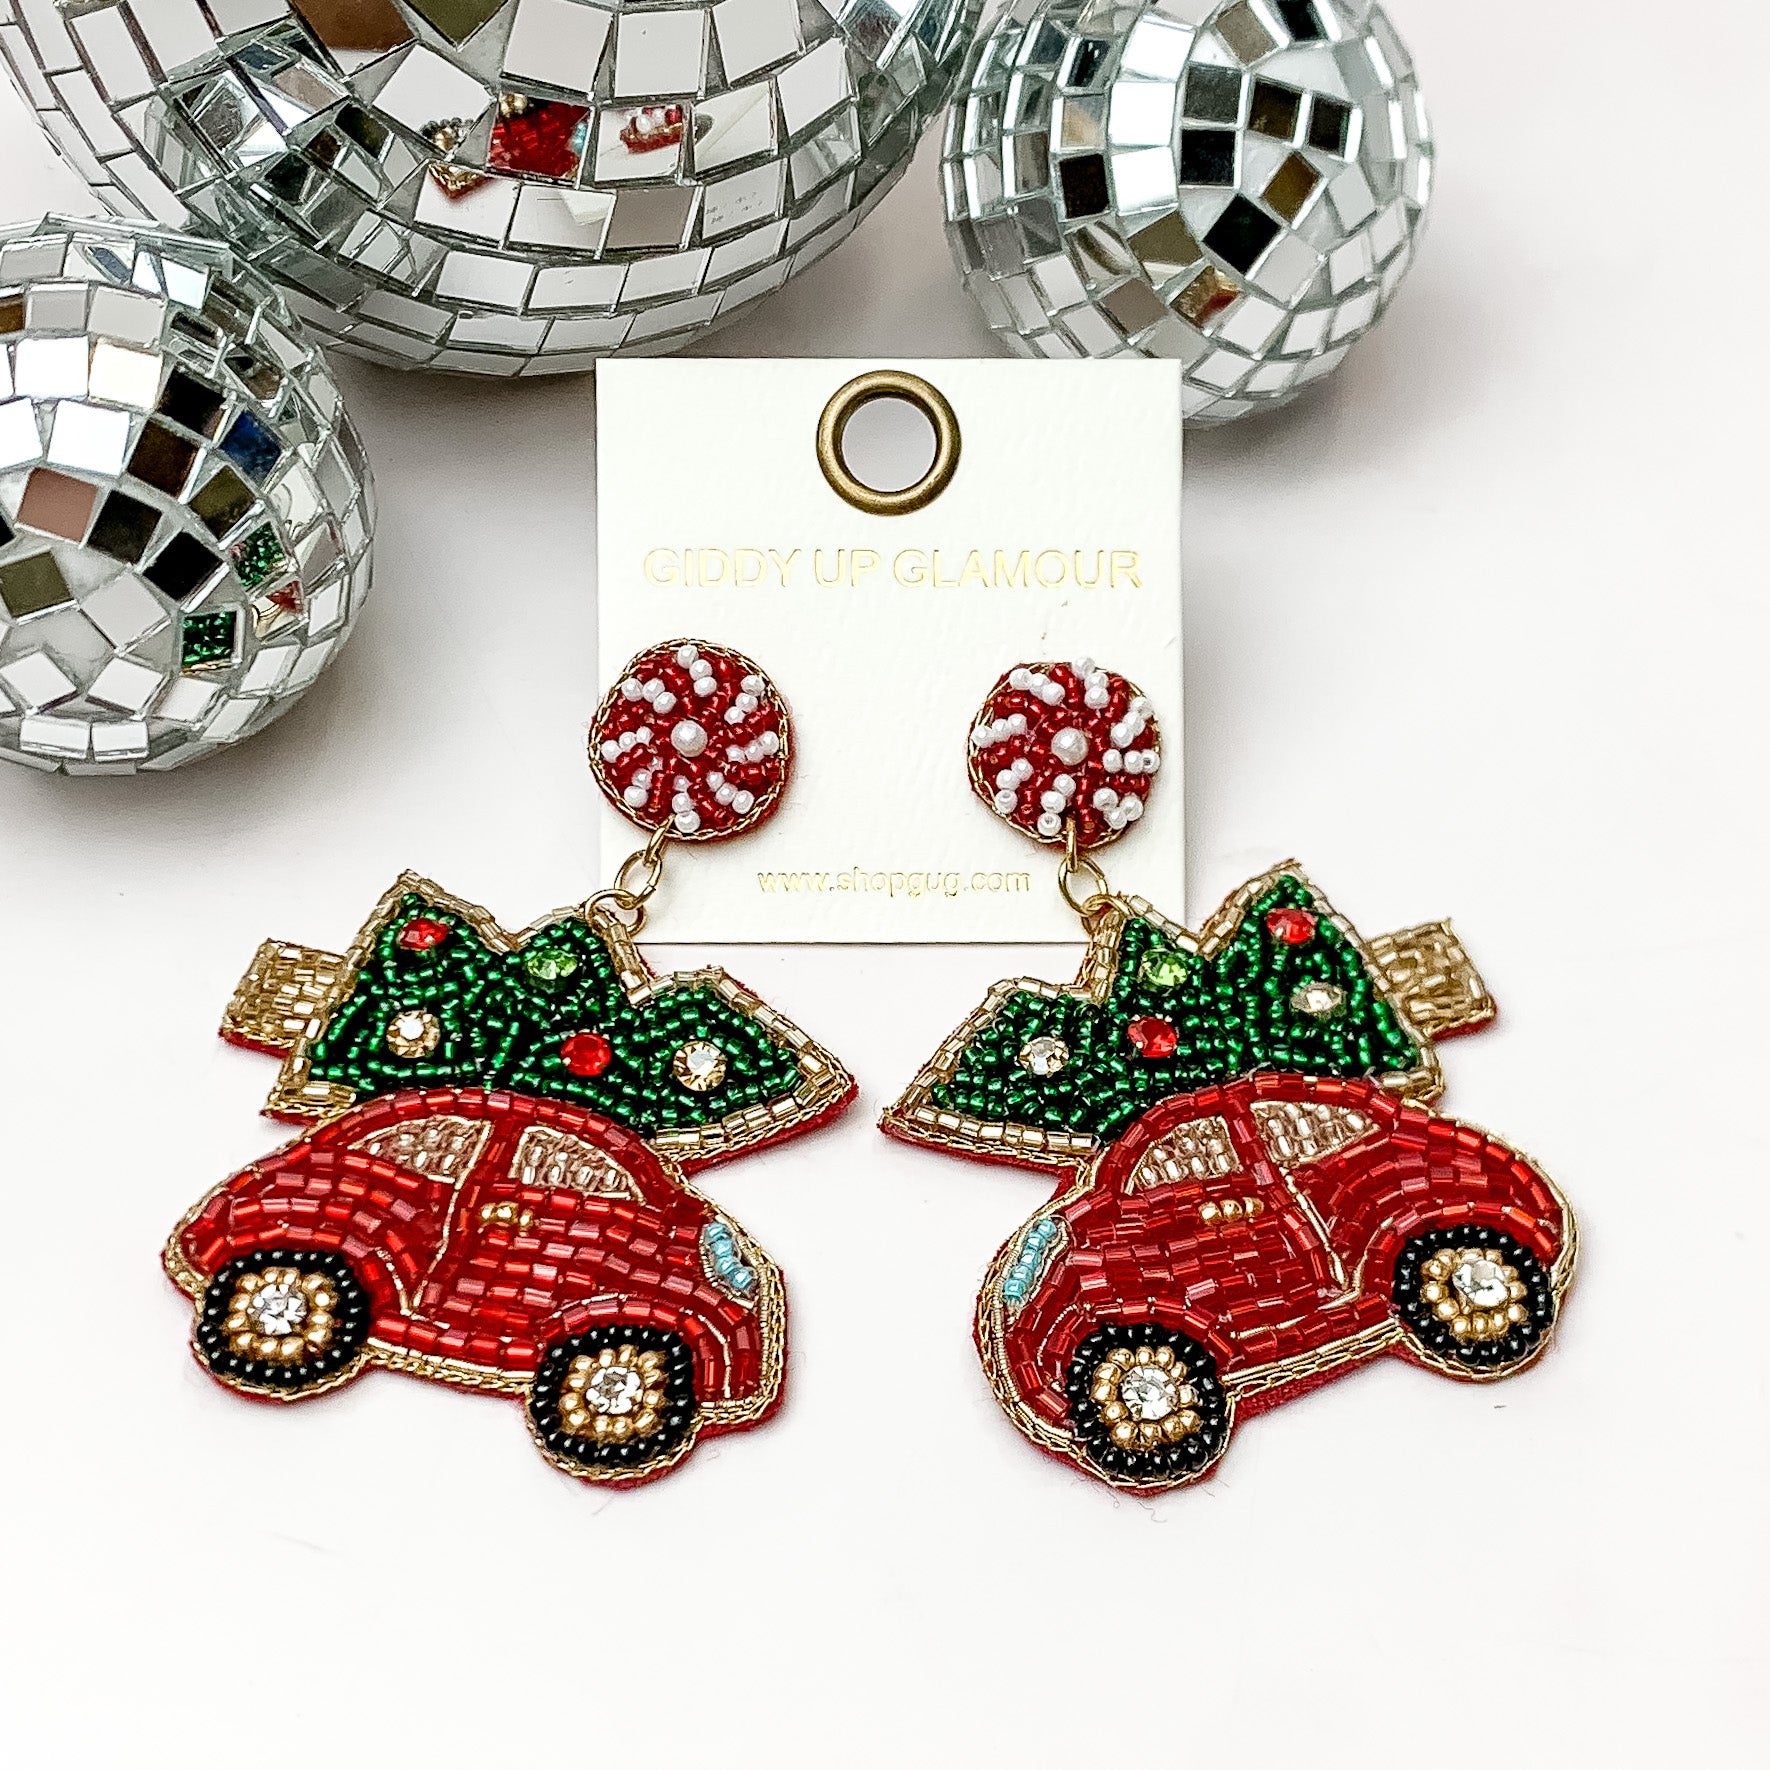 Beaded Car and Christmas Tree Earrings in Red - Giddy Up Glamour Boutique